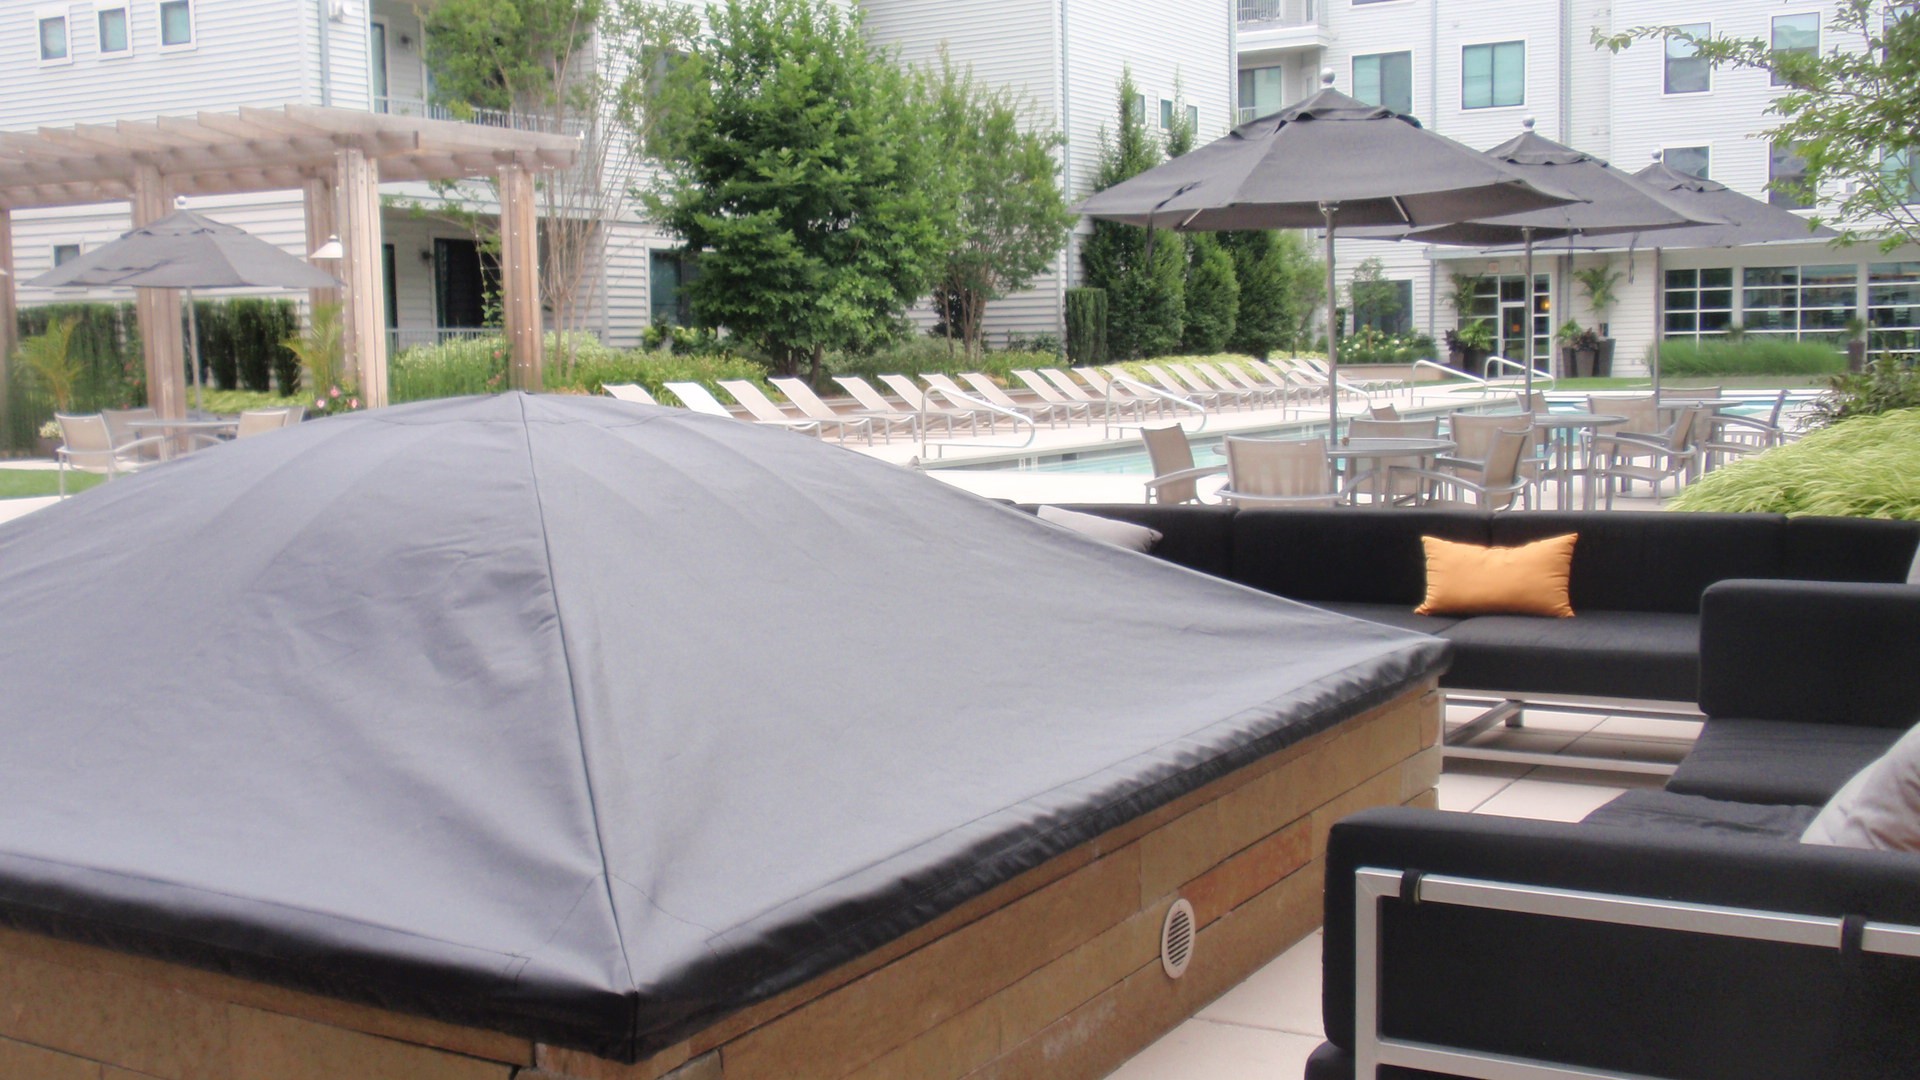 Fire Pit Covers built custom to fit various sizes of outdoor firepits & fireplaces.  A custom cover will help protect your outdoor fire pit from nature